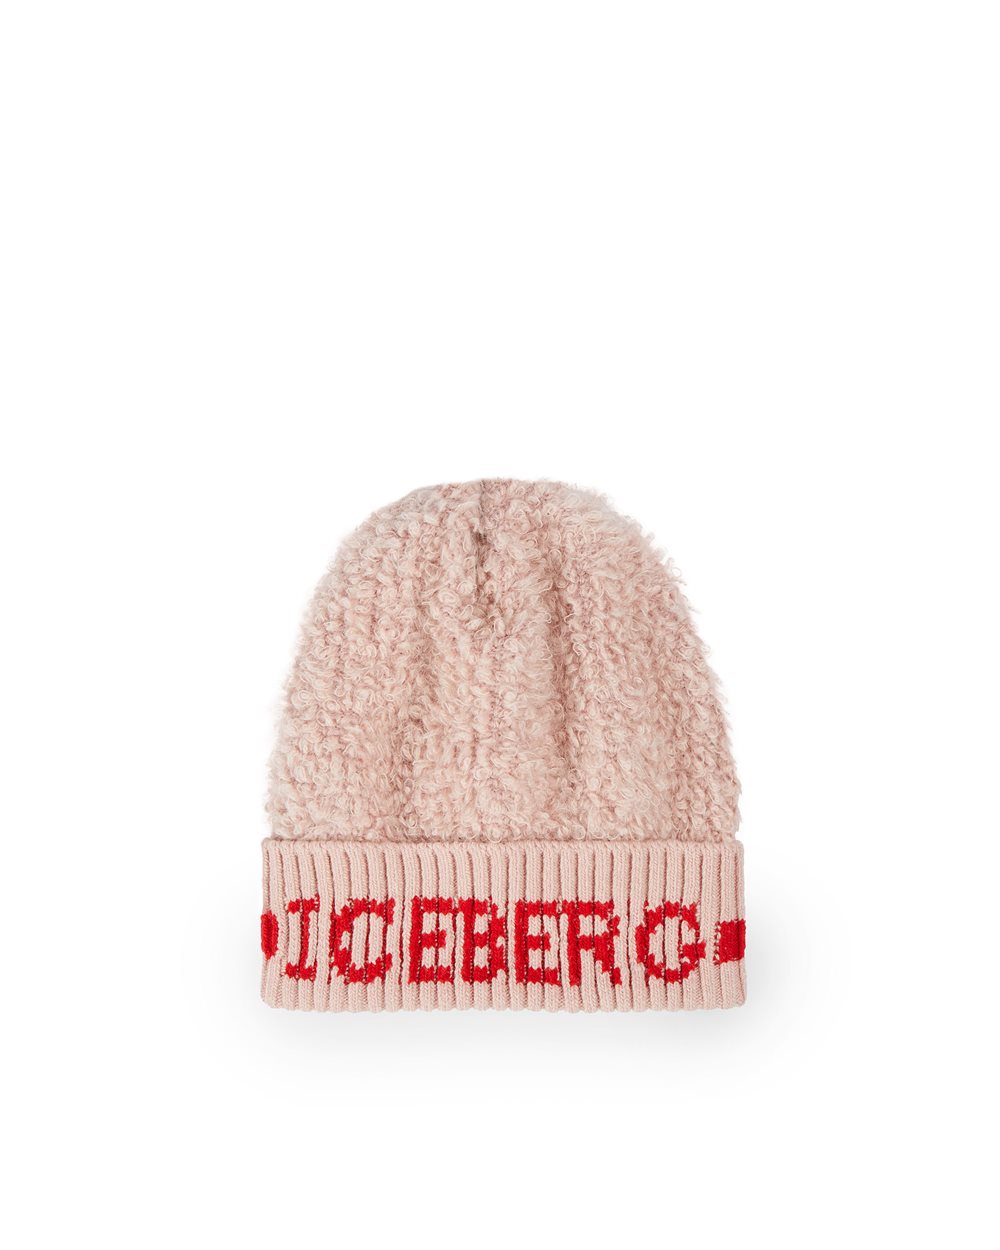 Wool hat with logo - carosello gift guide donna | Iceberg - Official Website